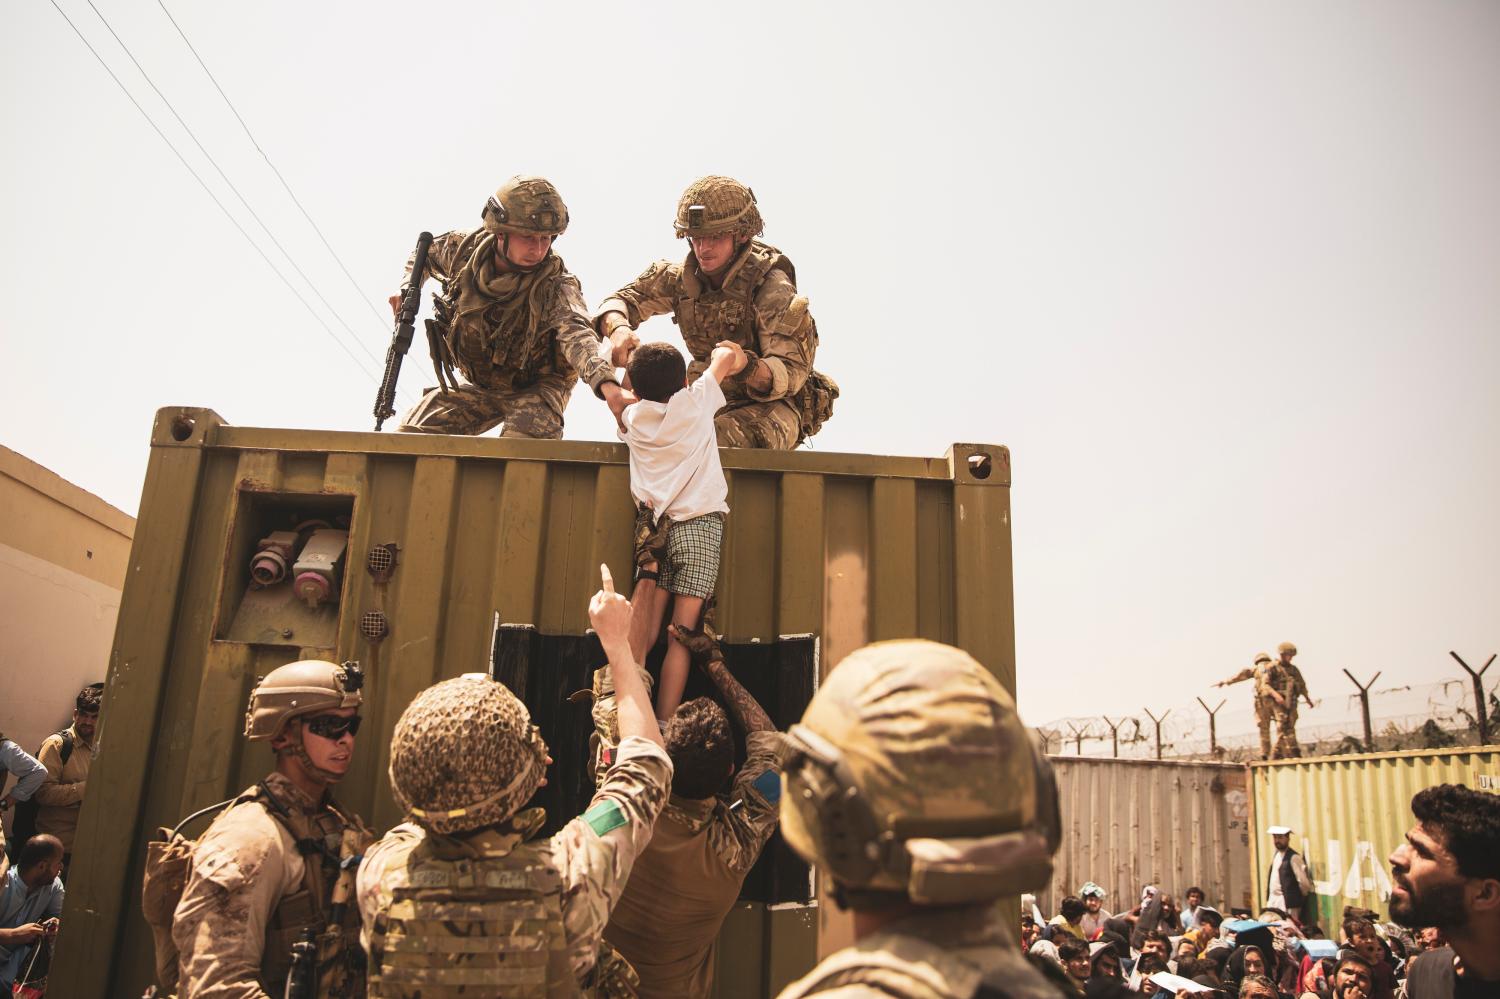 British, Turkish and US soldiers assist a child during the evacuation of civilians at Hamid Karzai International Airport.